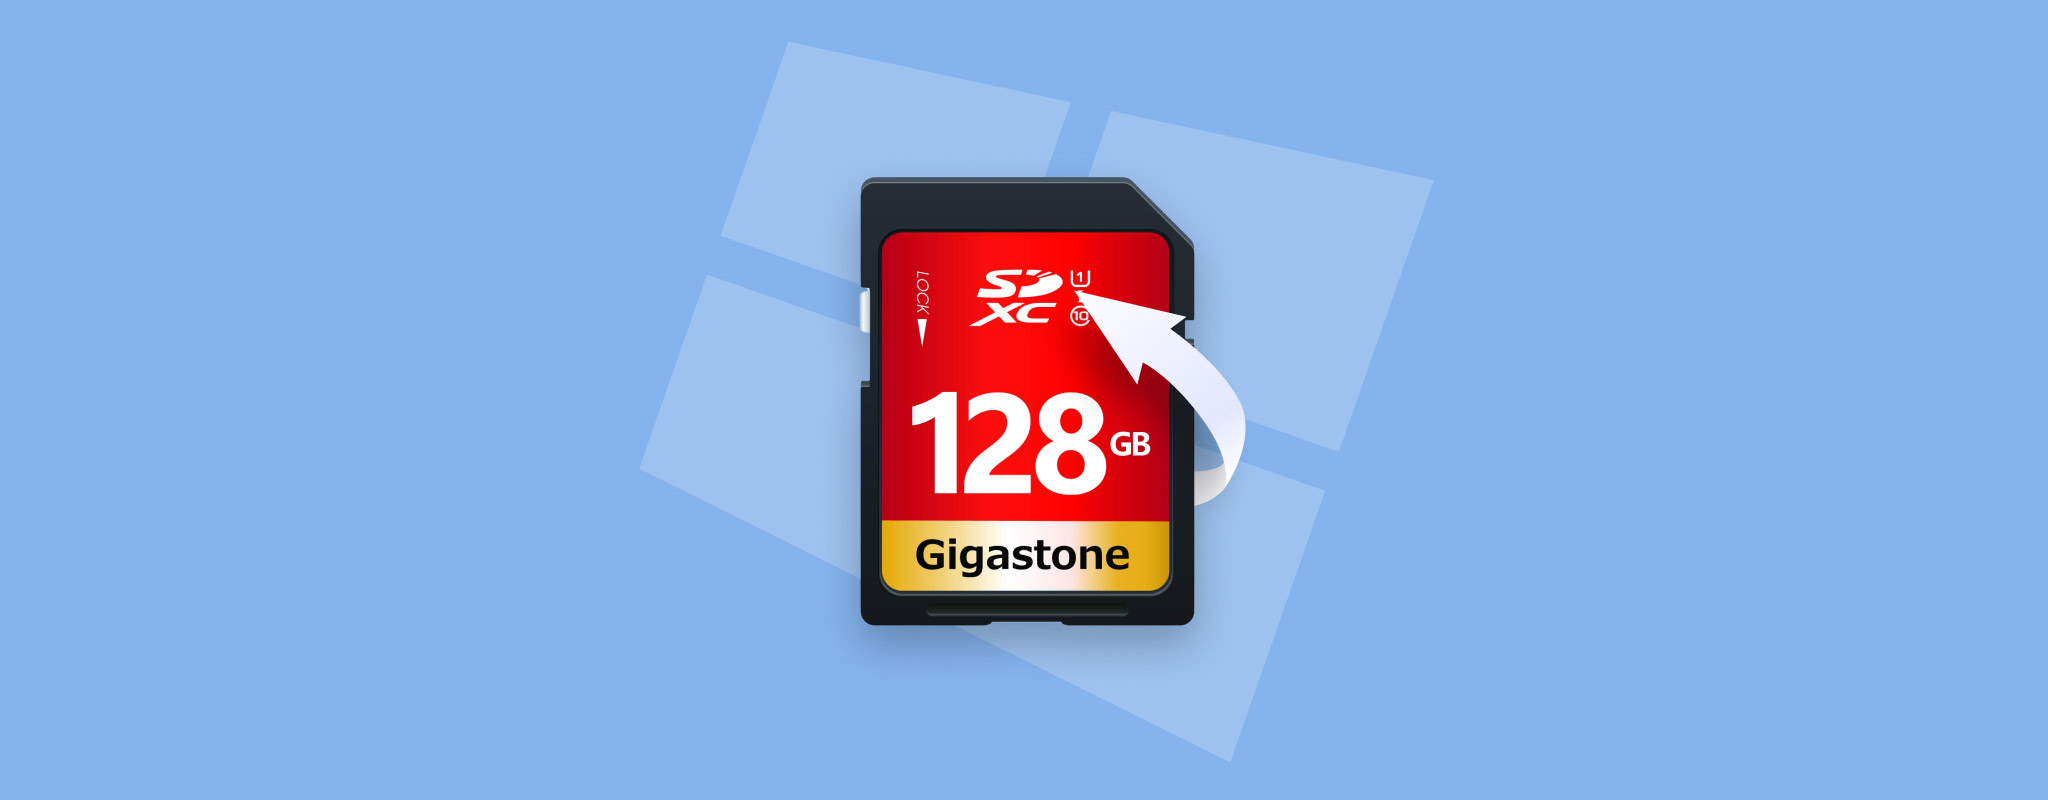 recover data from gigastone sd card